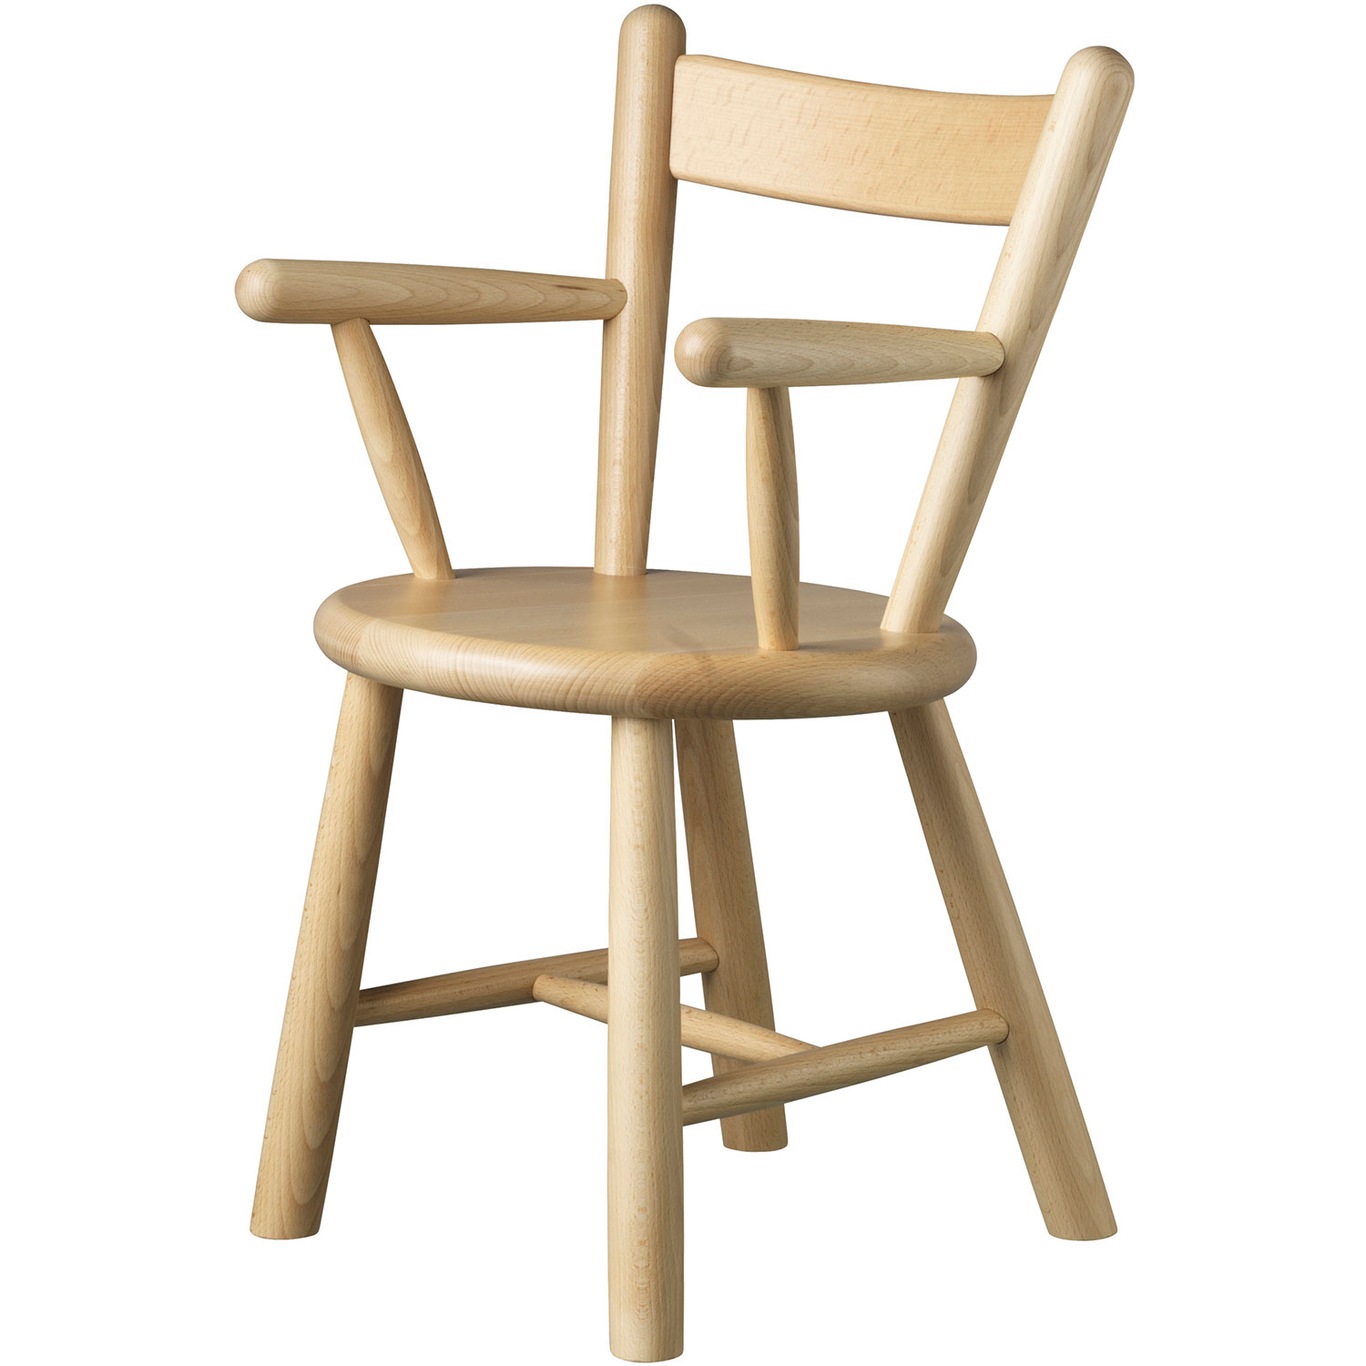 P9 Children'S Chair, Lacquered Beech / Nature